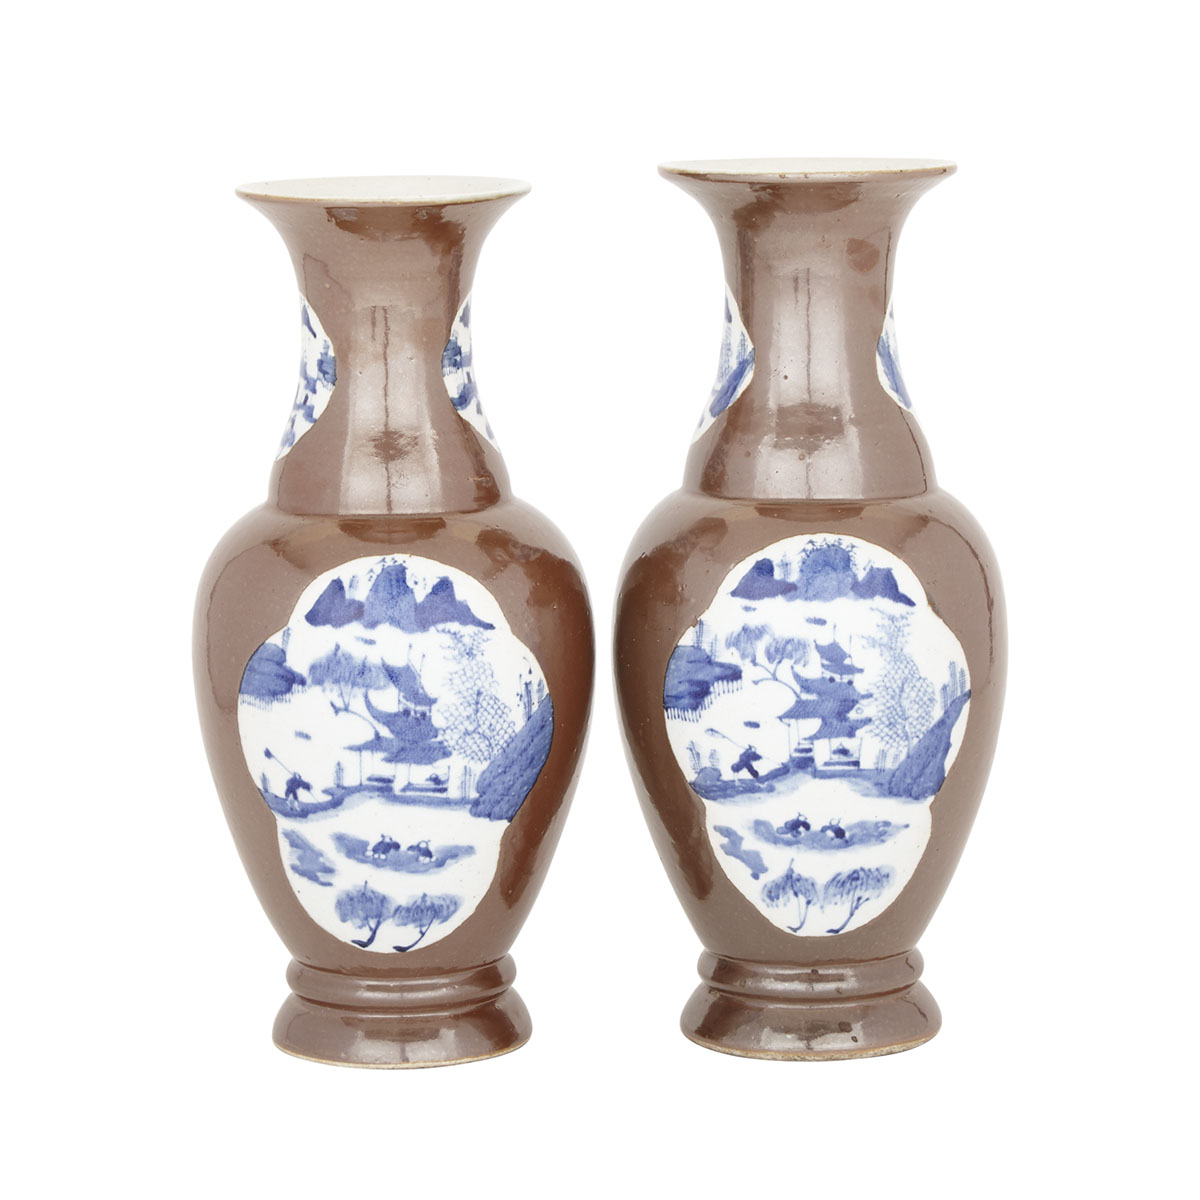 A Pair of Cafe au Lait Landscape Baluster Vases, Early 20th Century